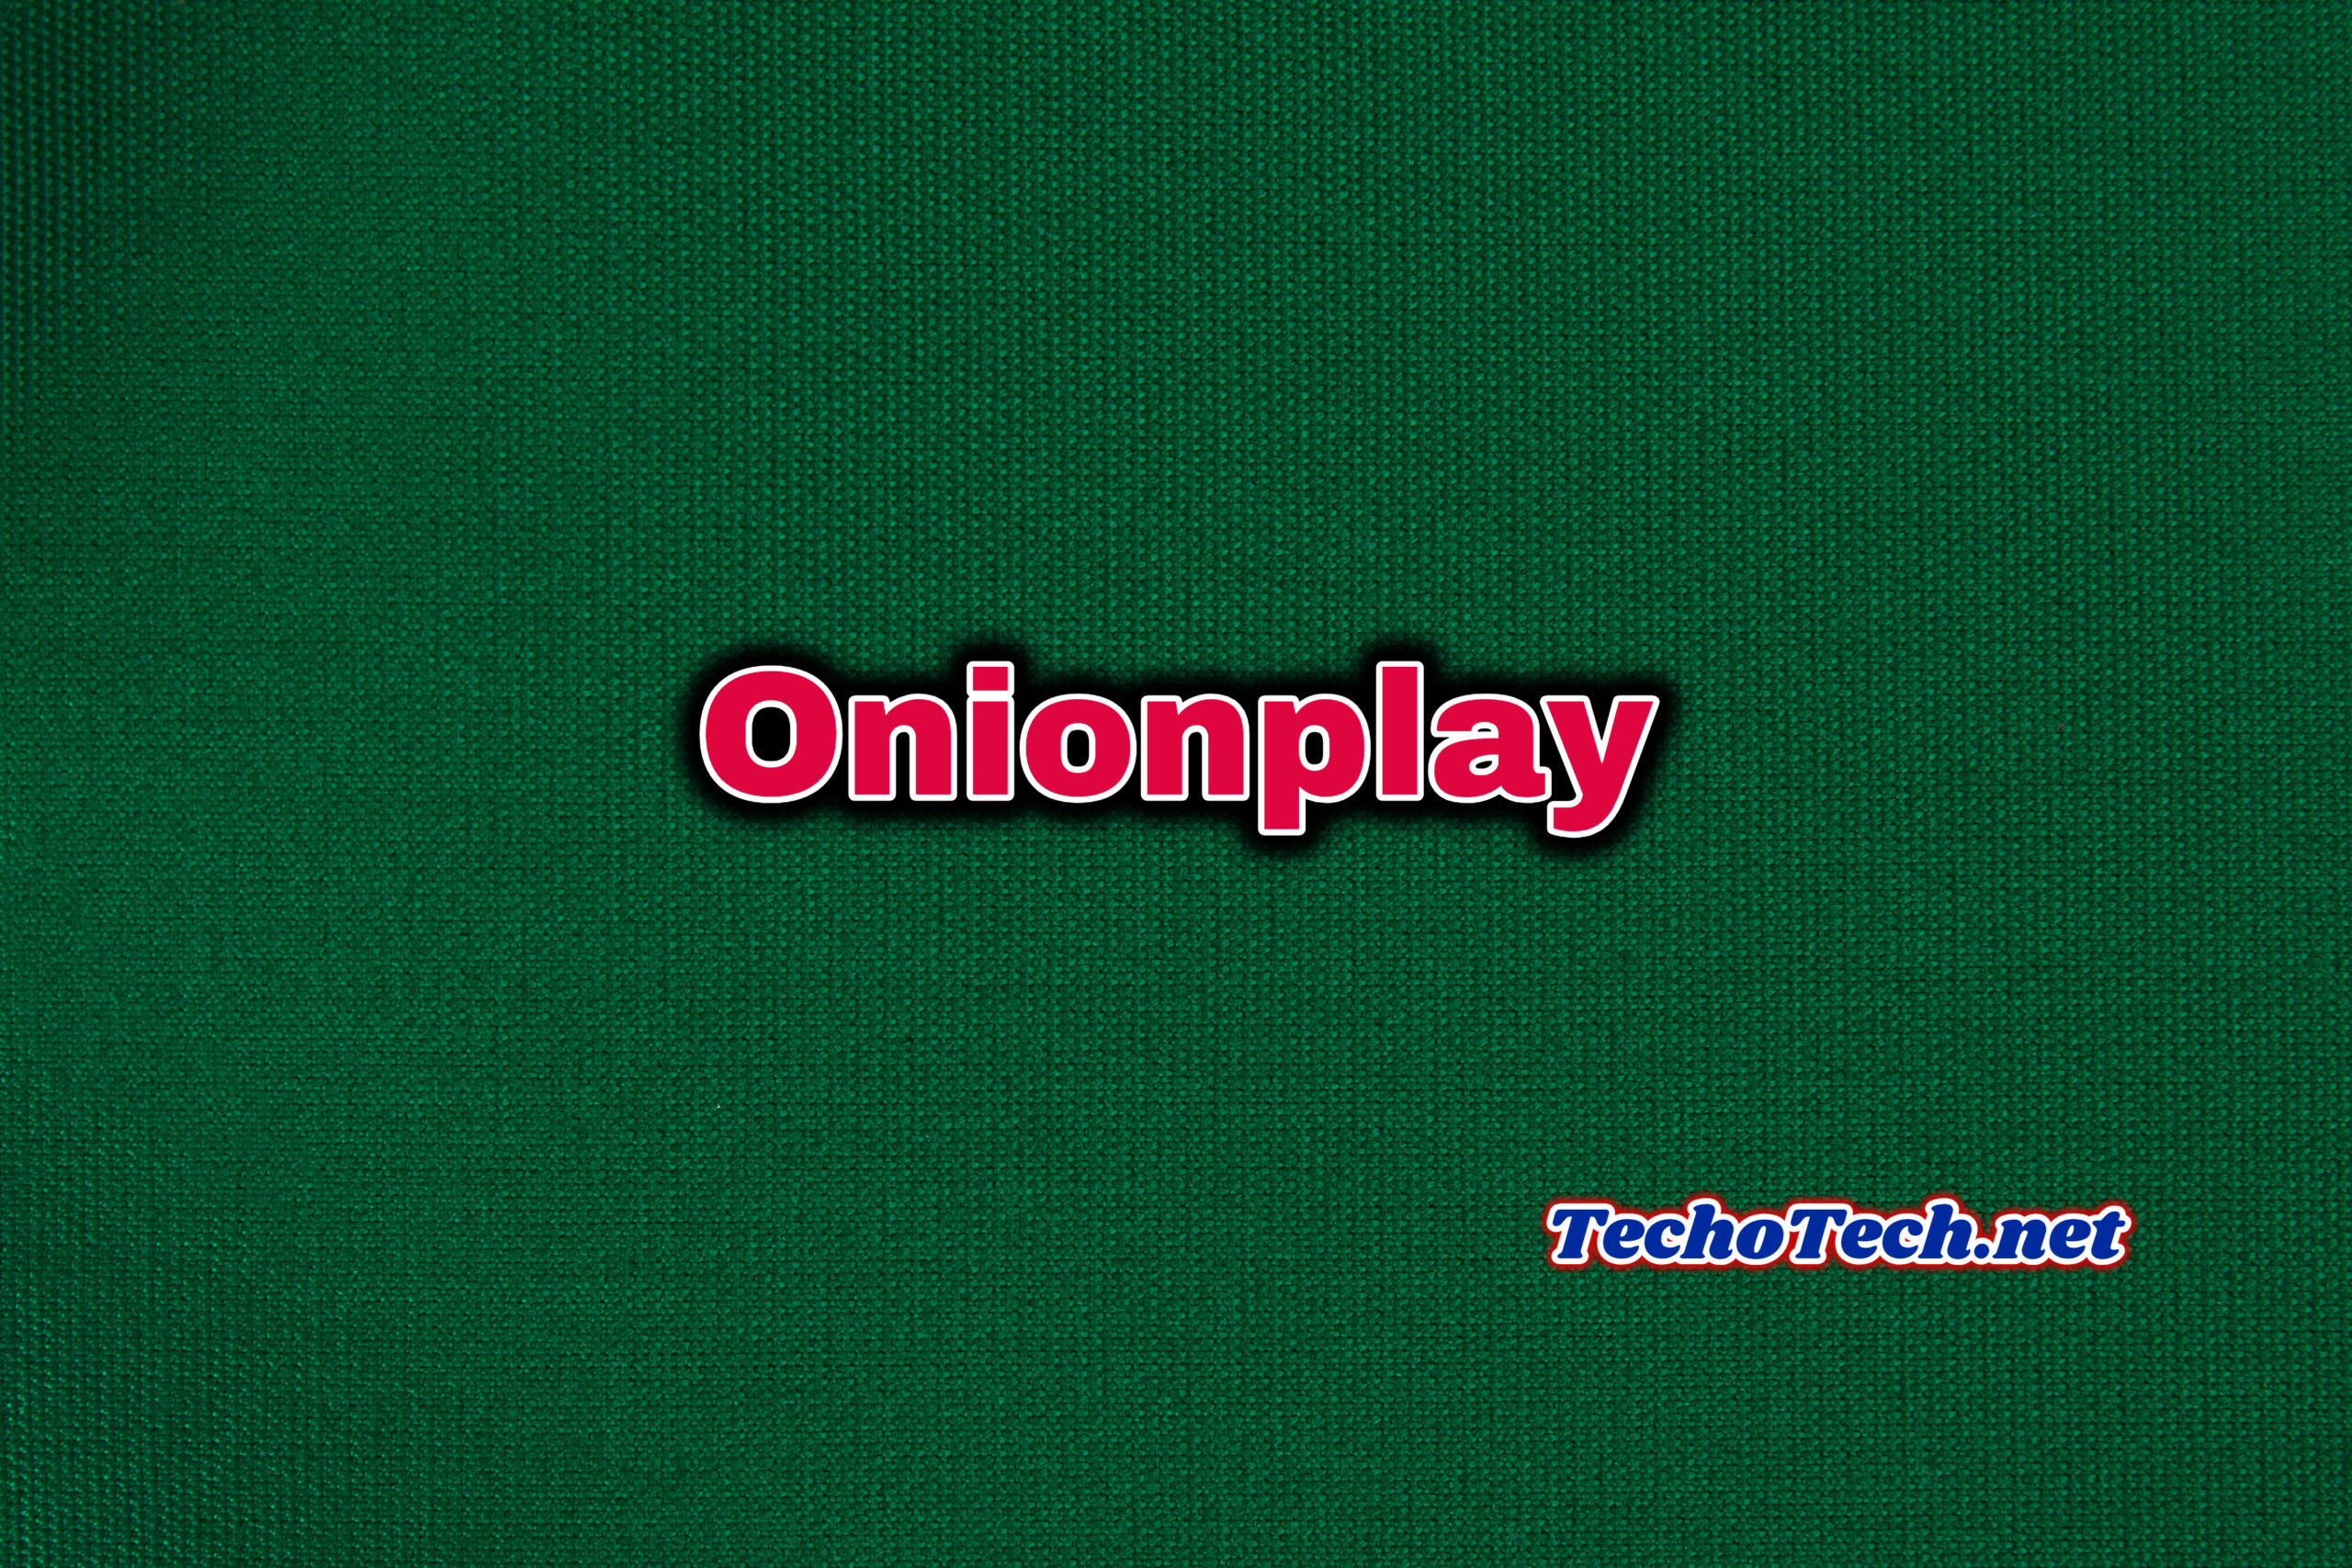 Onionplay: Discover a Whole New World of Entertainment